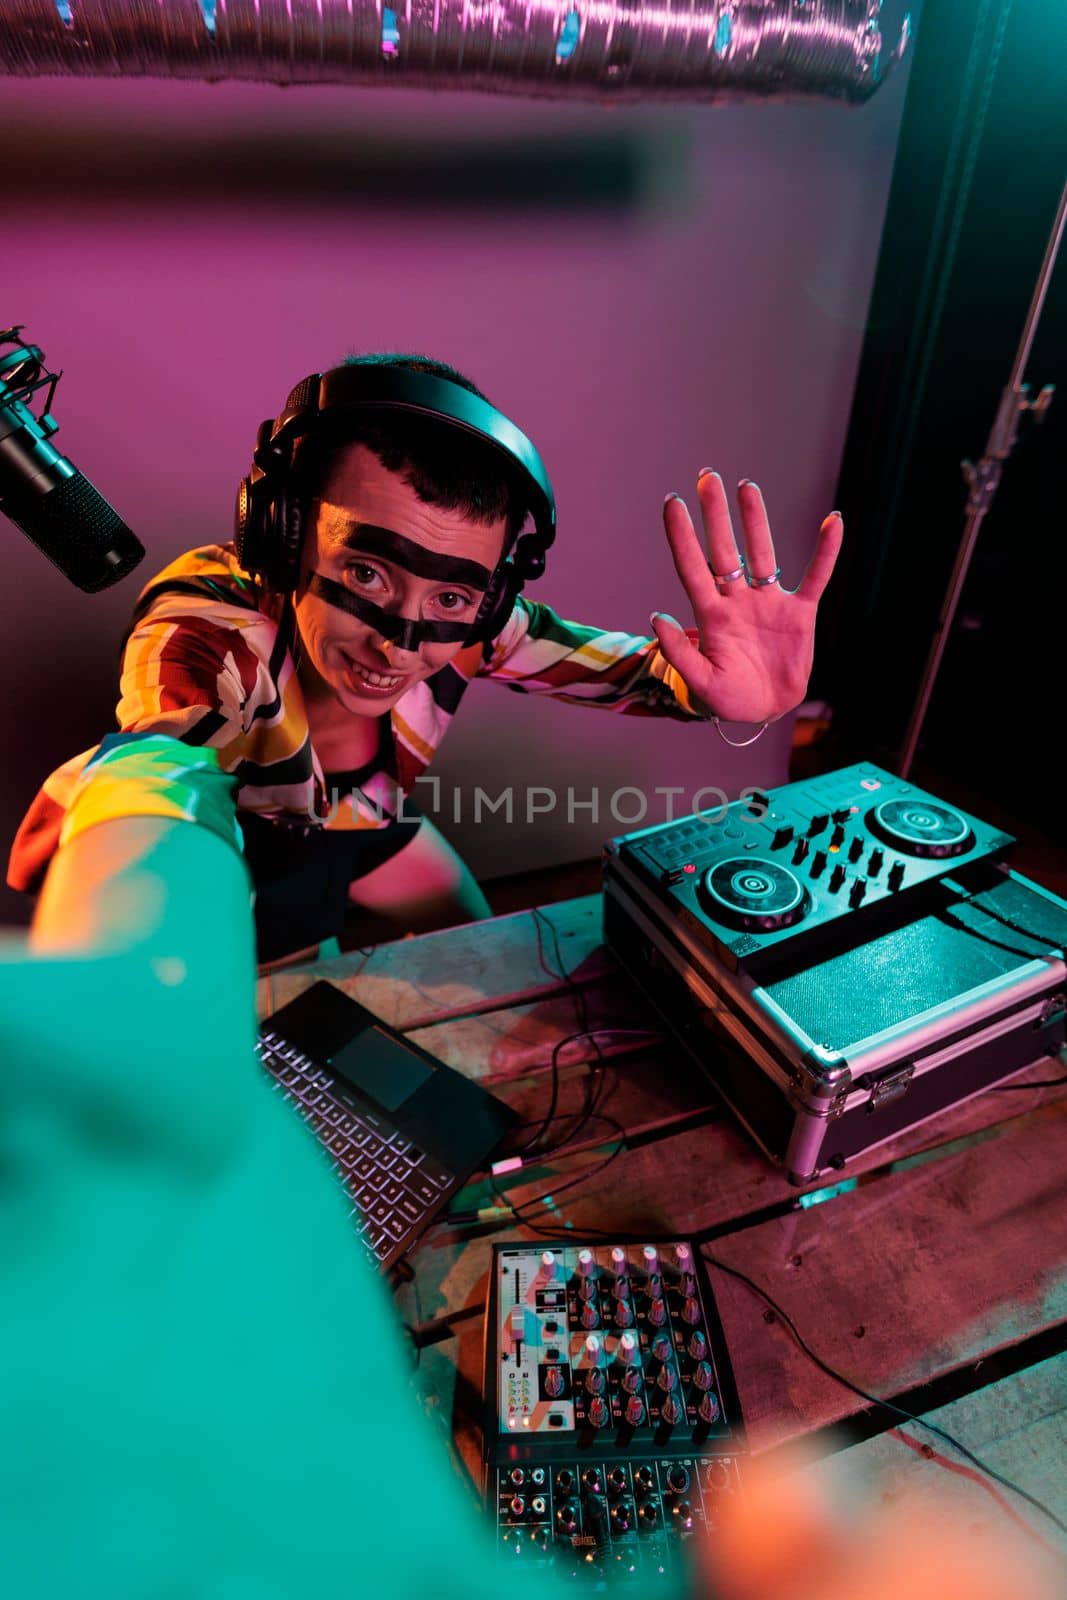 Woman dj artist mixing sounds on turntables by DCStudio